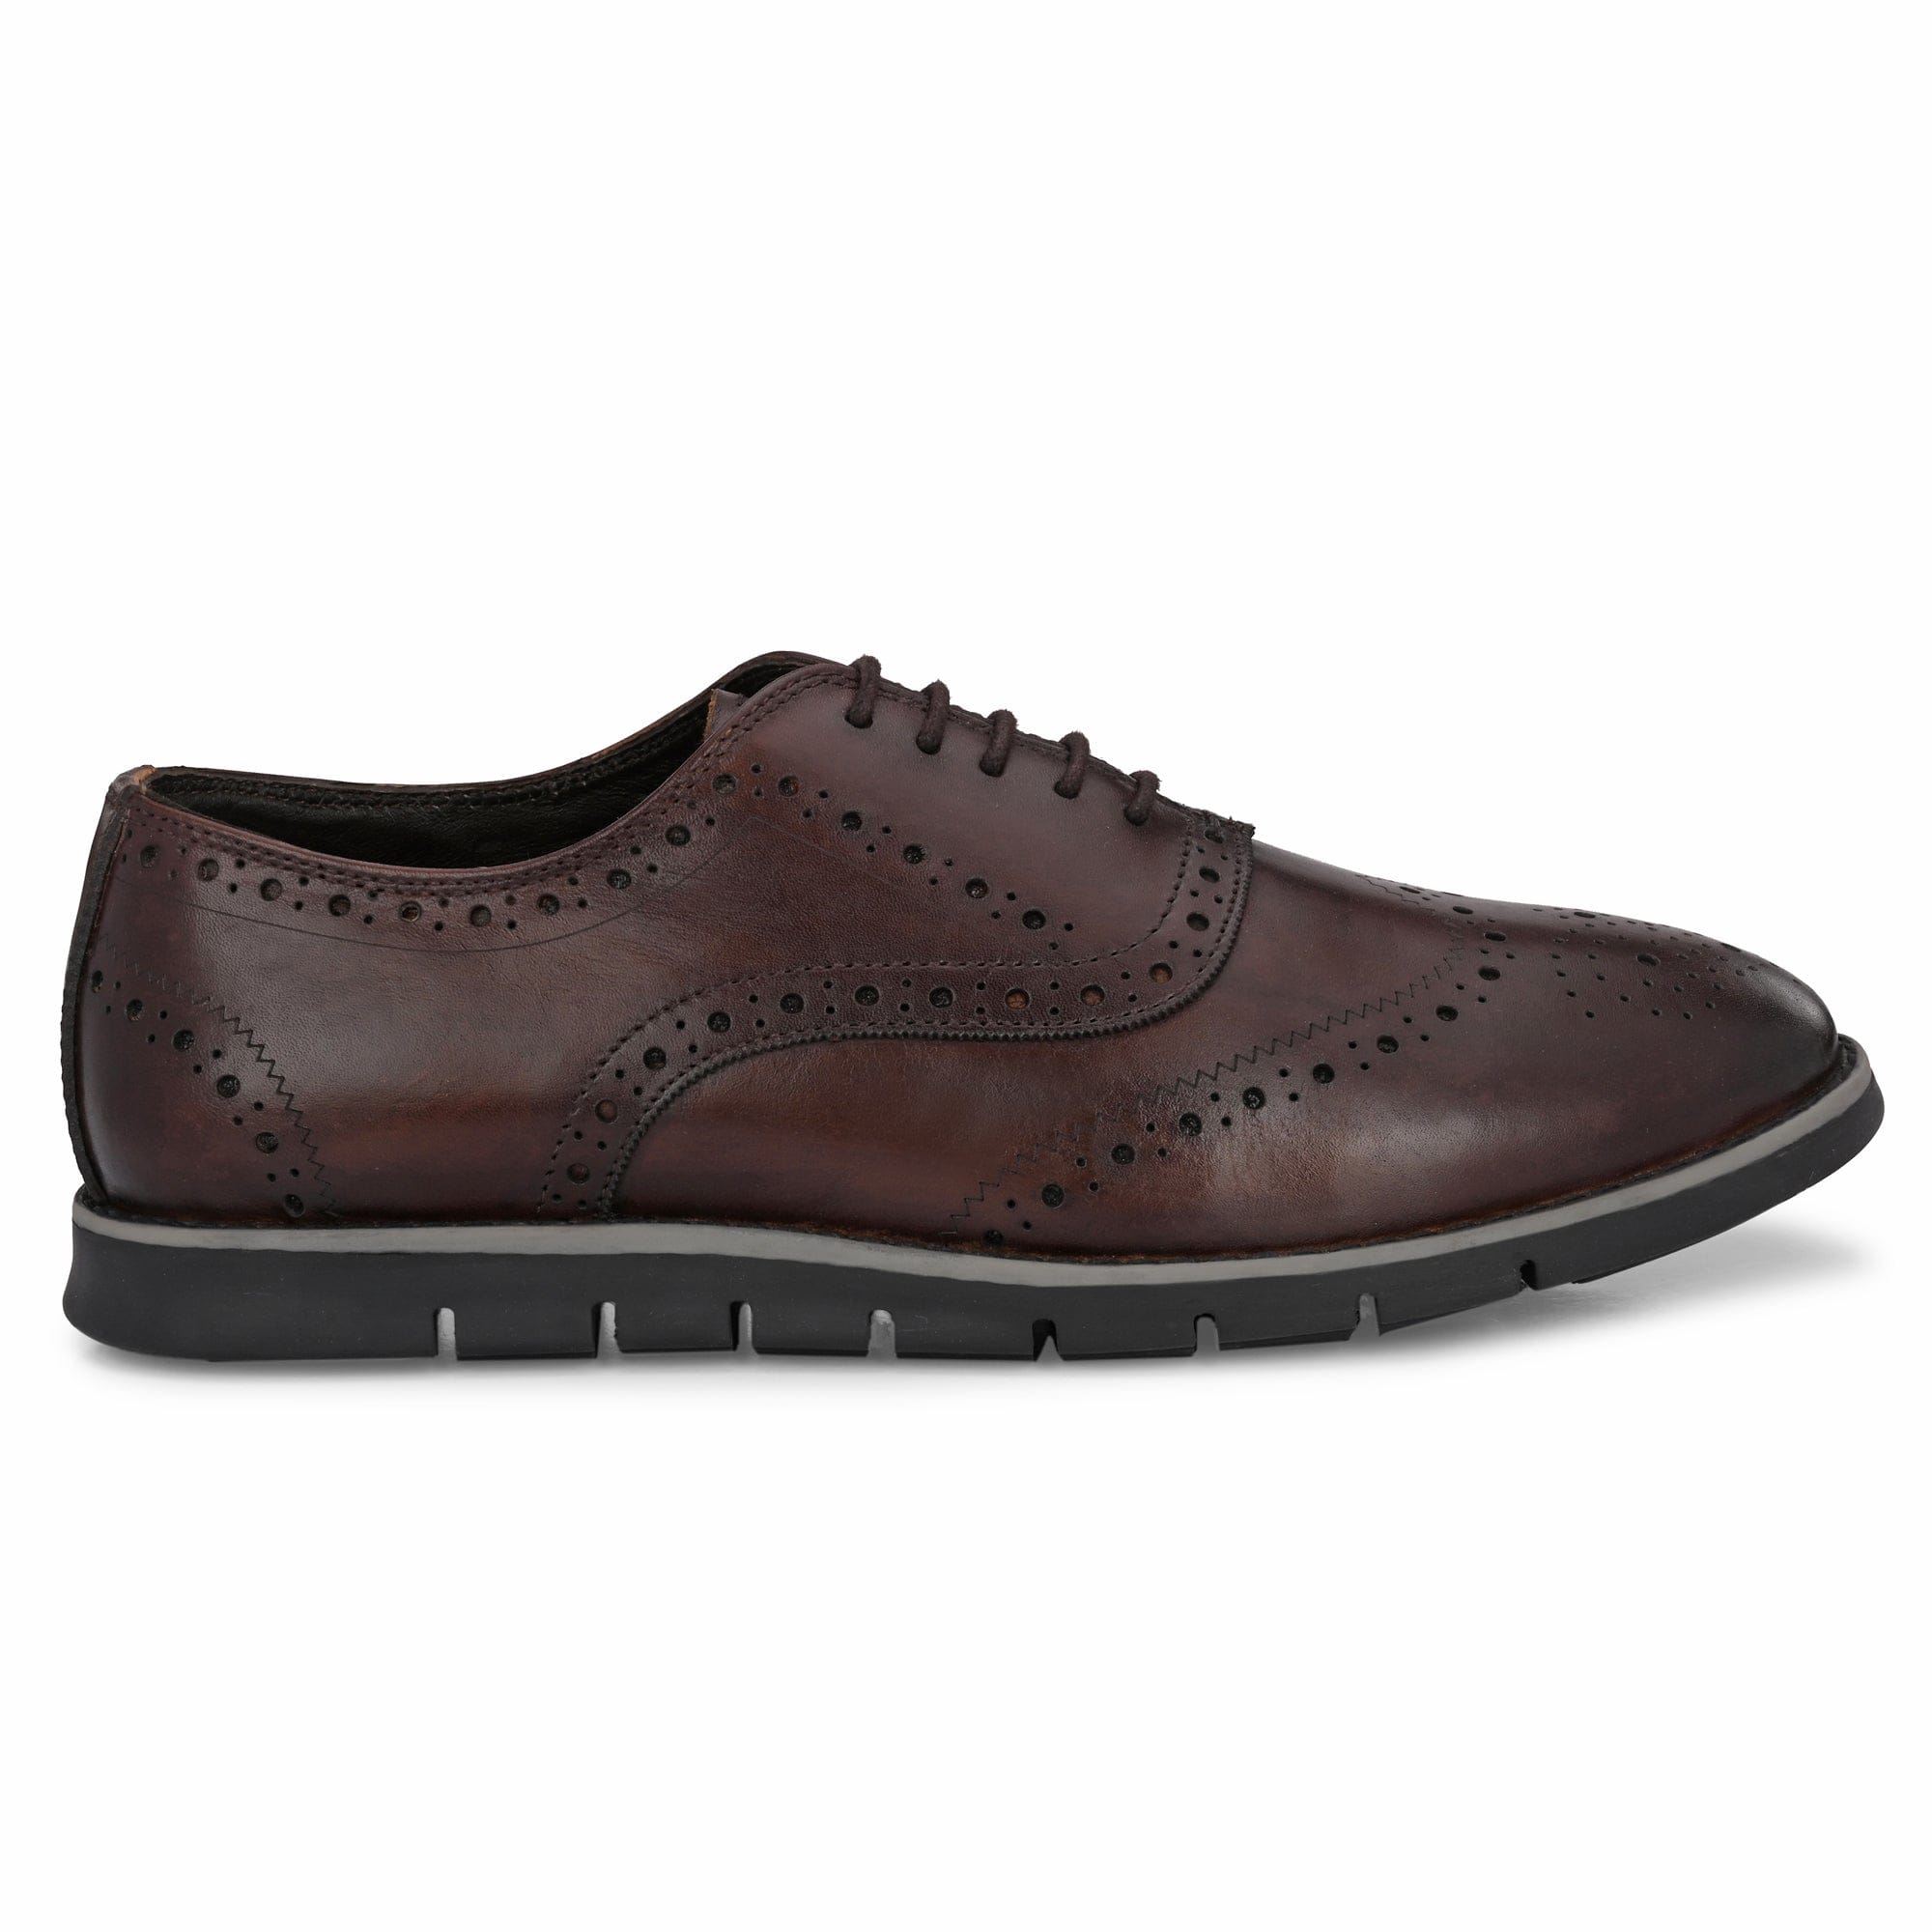 Cole Haan Men Dress Formal Casual Shoes Zerogrand Wingtip Leather Oxford  Shoes